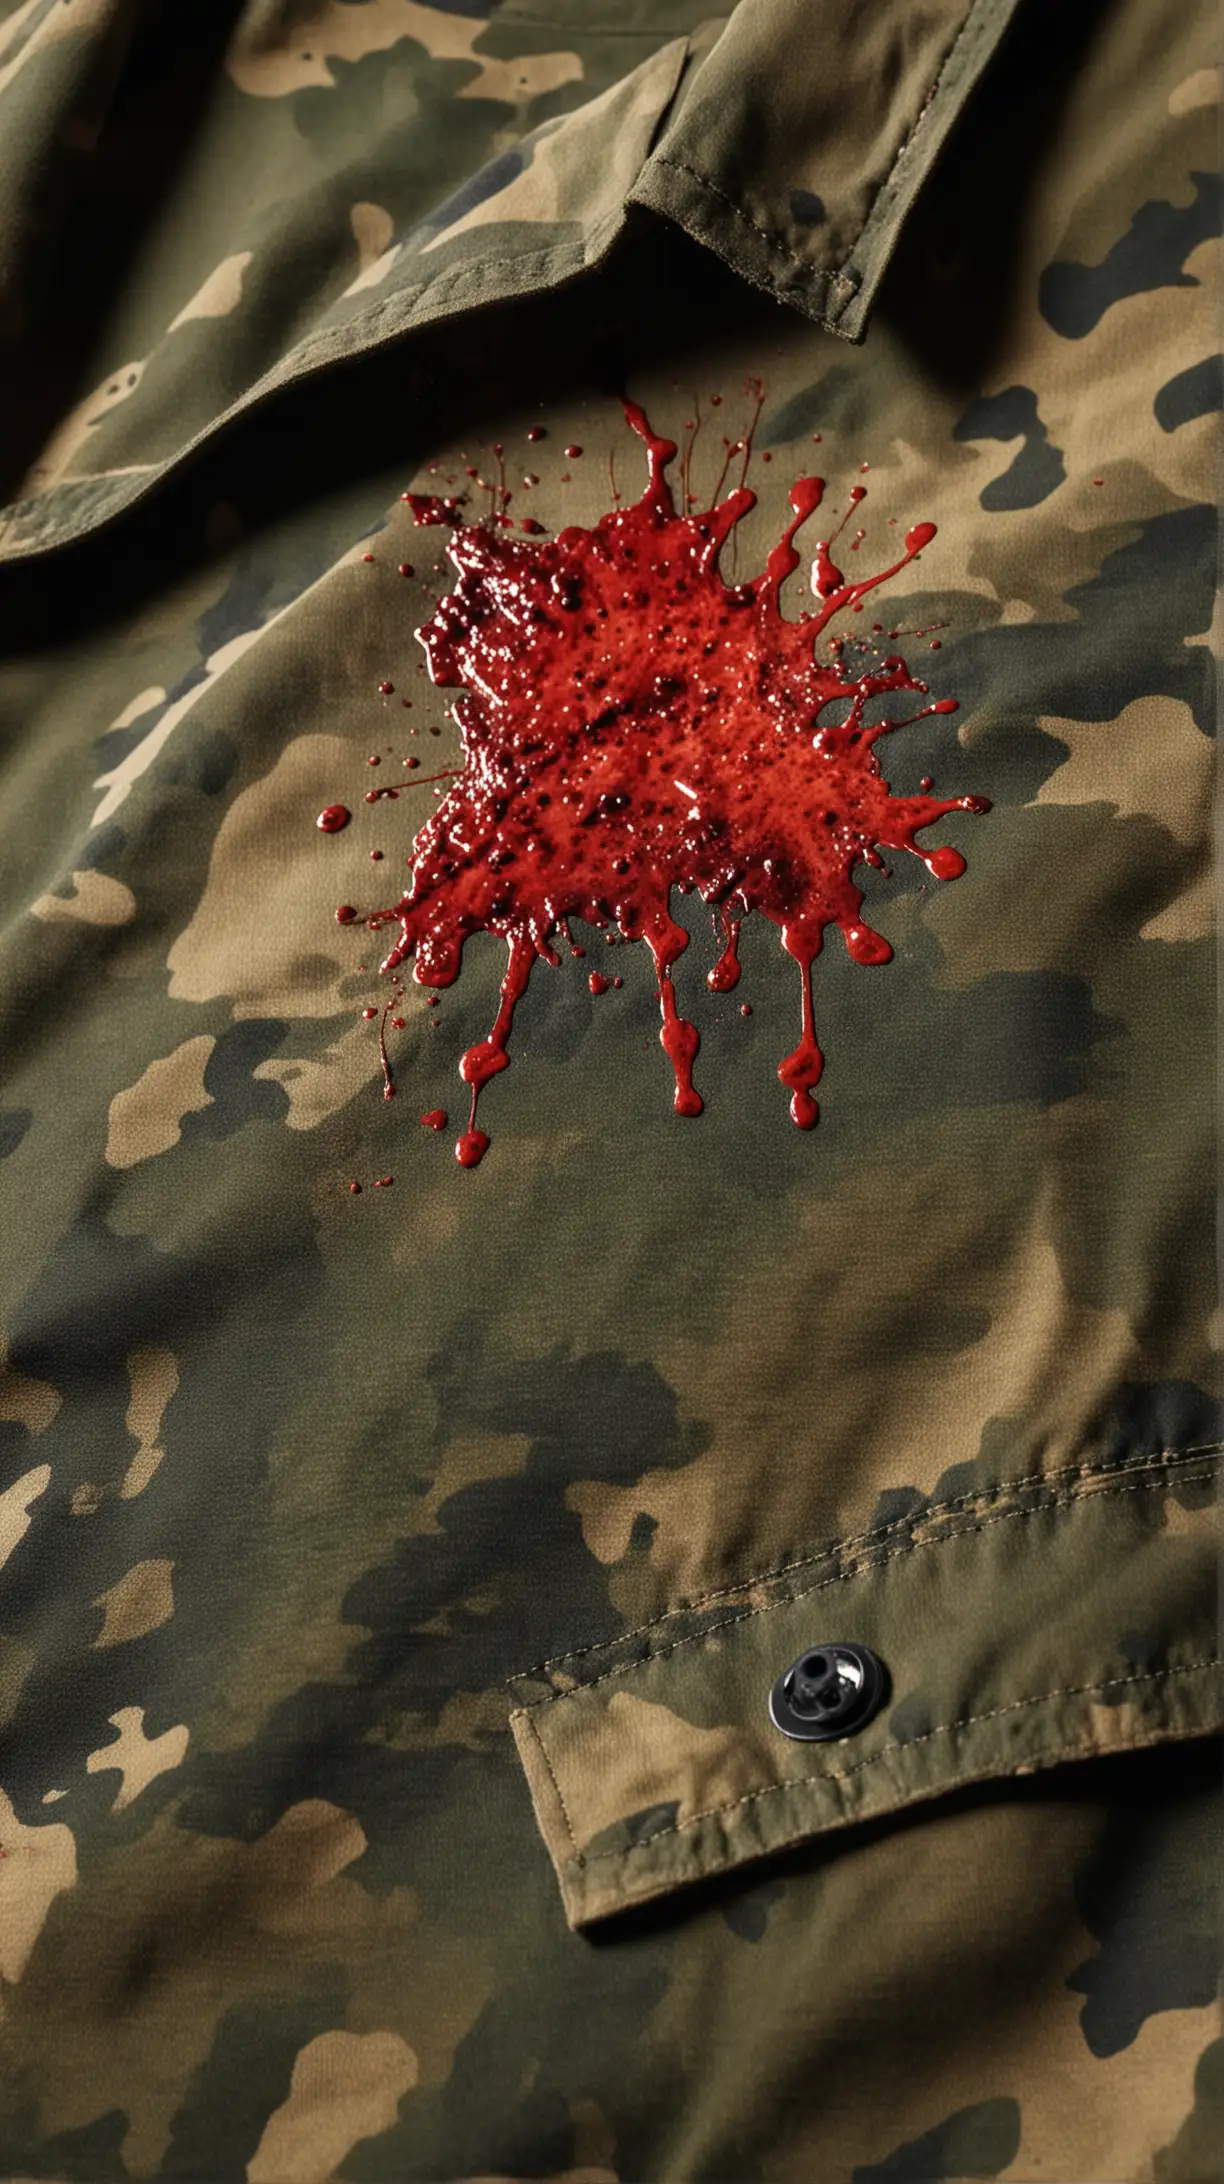 Military Camouflage Shirt with CloseUp View of Blood Stain